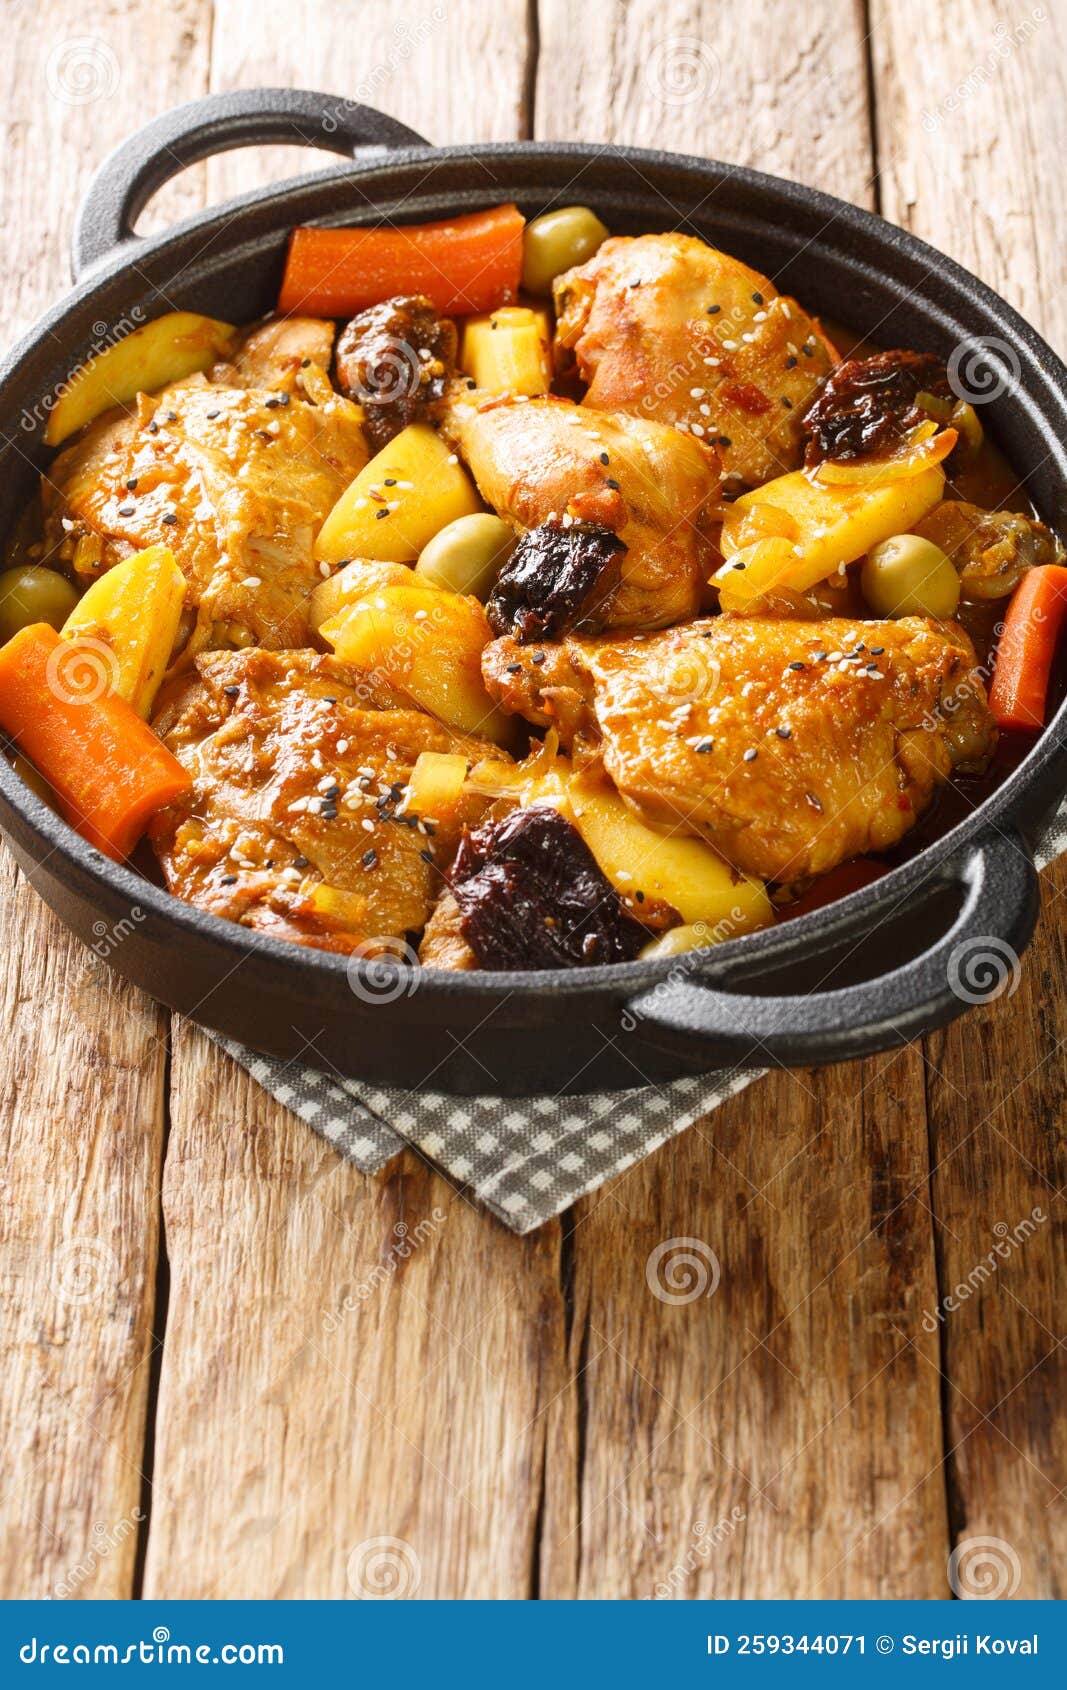 braised chicken meat with spicy sauce, prunes, carrots, potatoes, olives and onions close-up in a frying pan. vertical